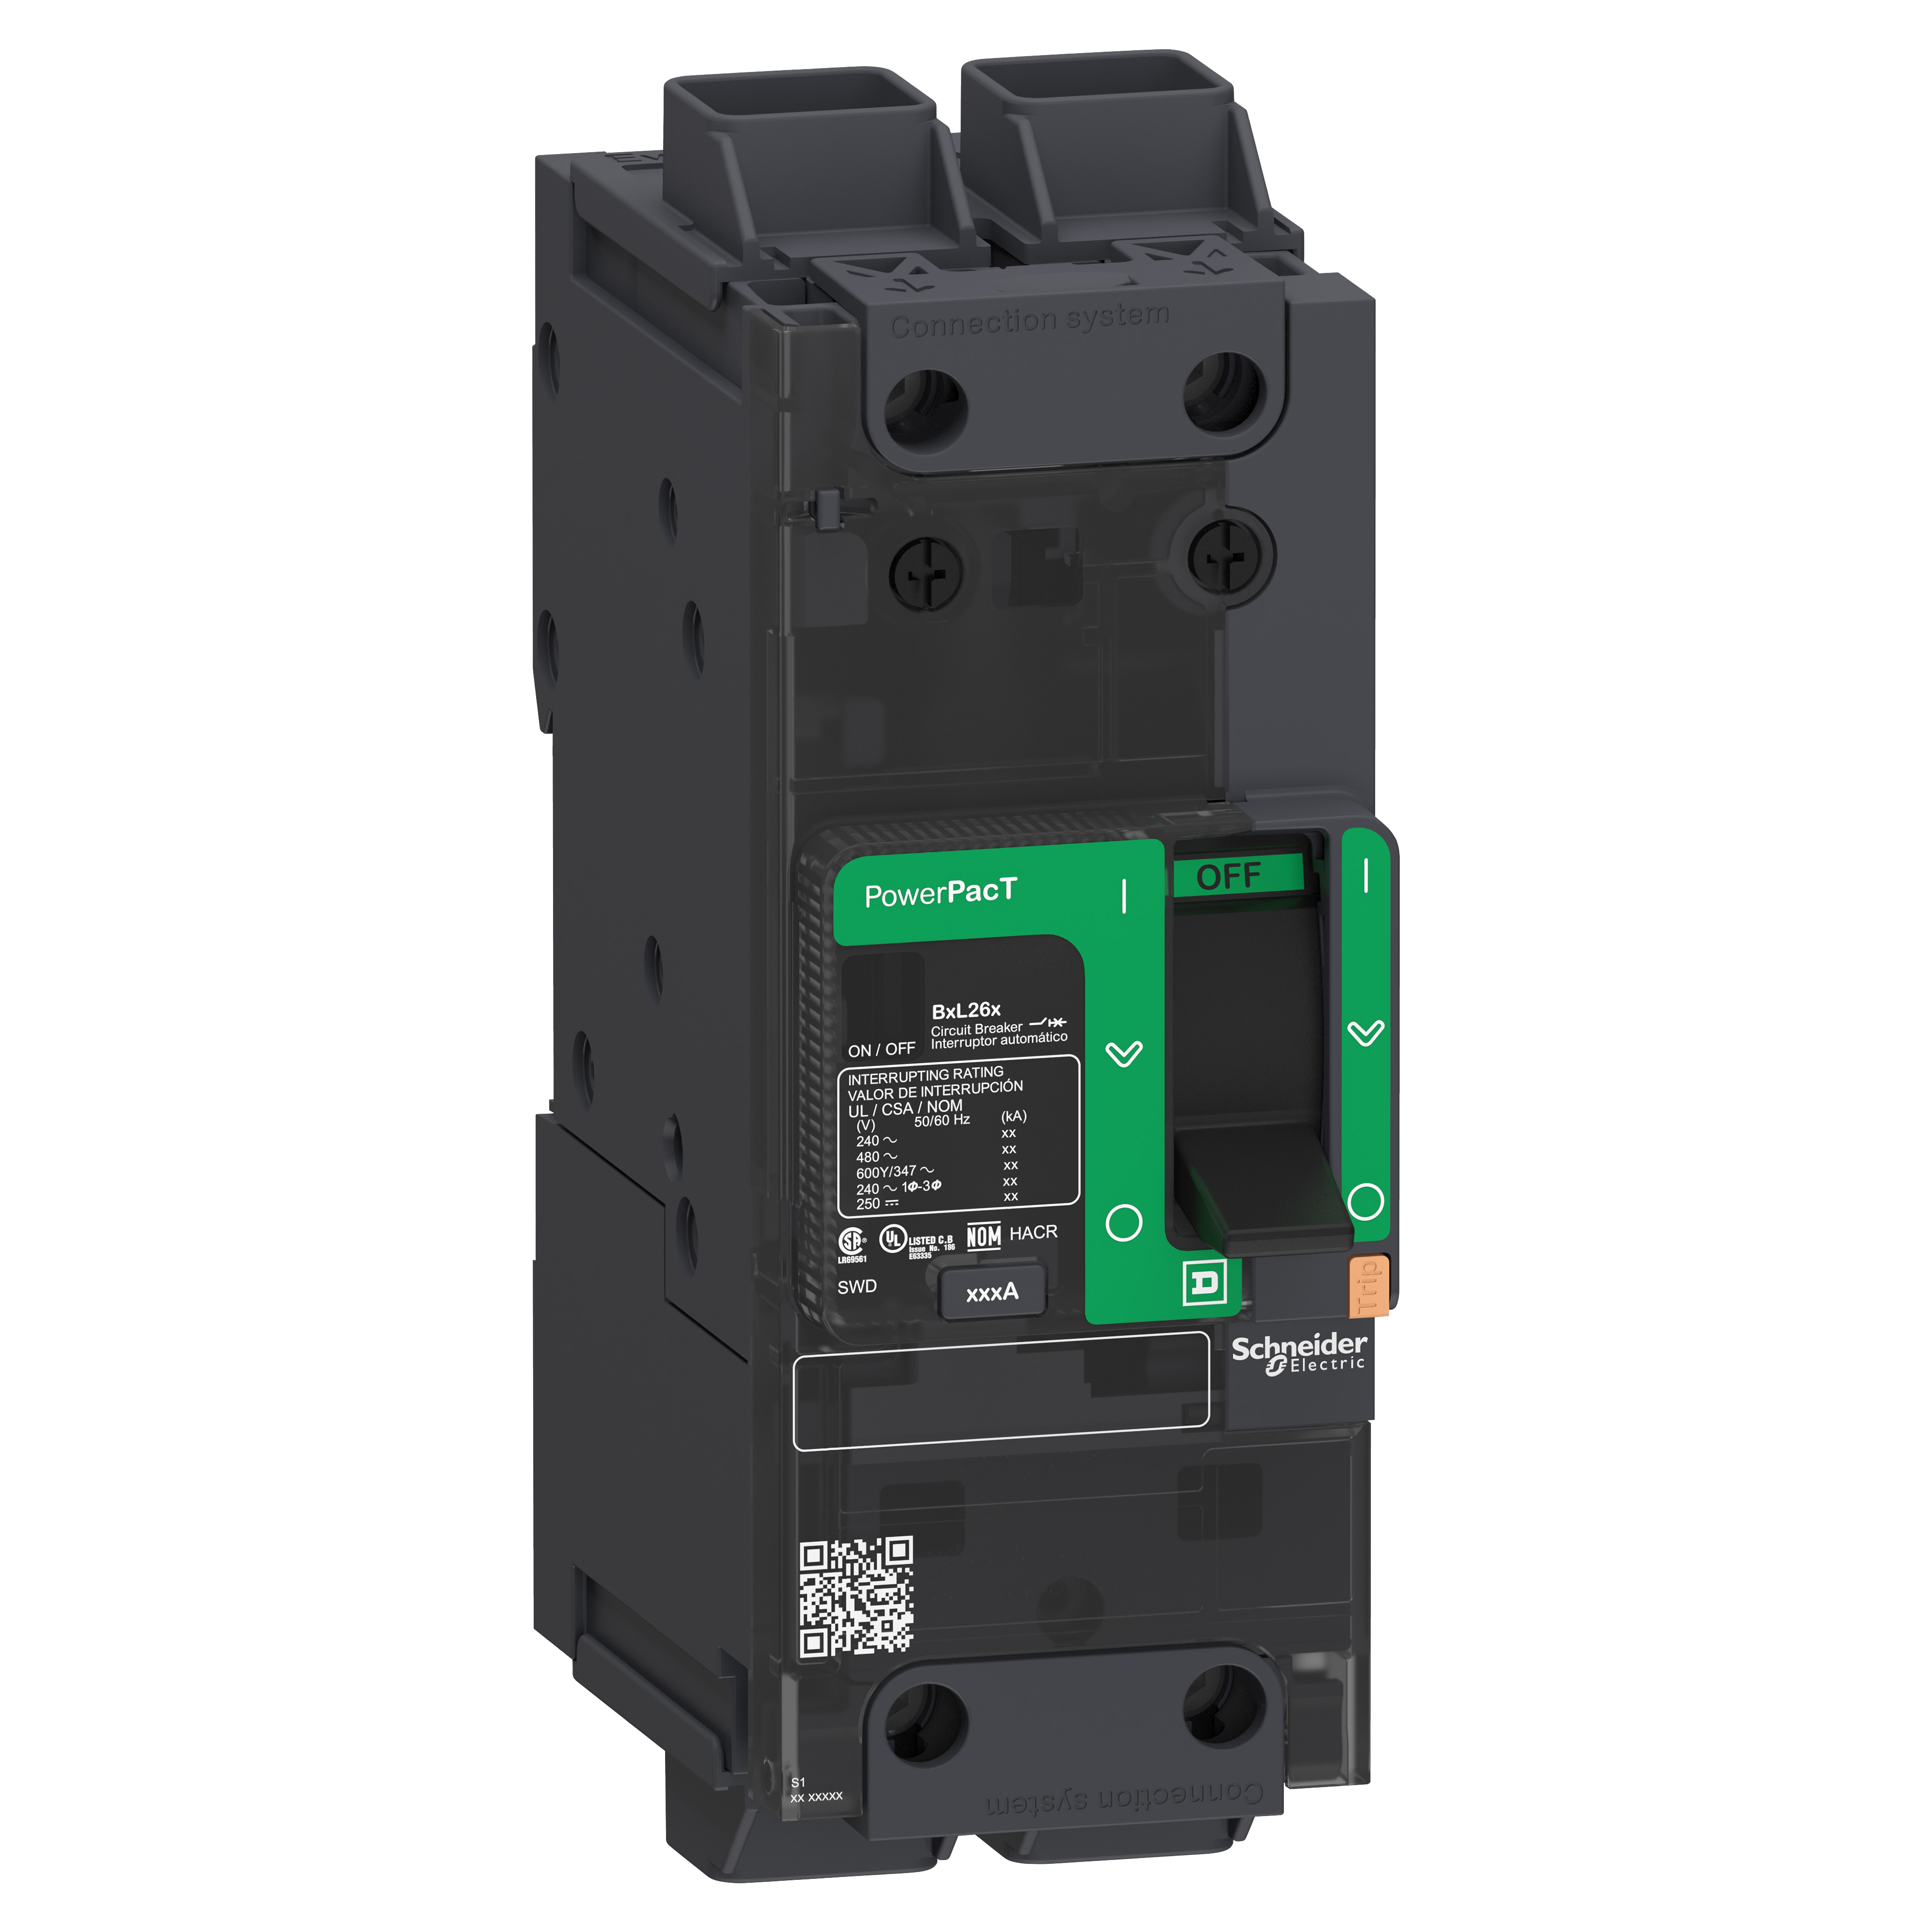 Circuit breaker, PowerPacT B, 50A, 2 pole, 600Y/347VAC, 18kA, lugs, thermal magnetic, 80%, control wire ON end